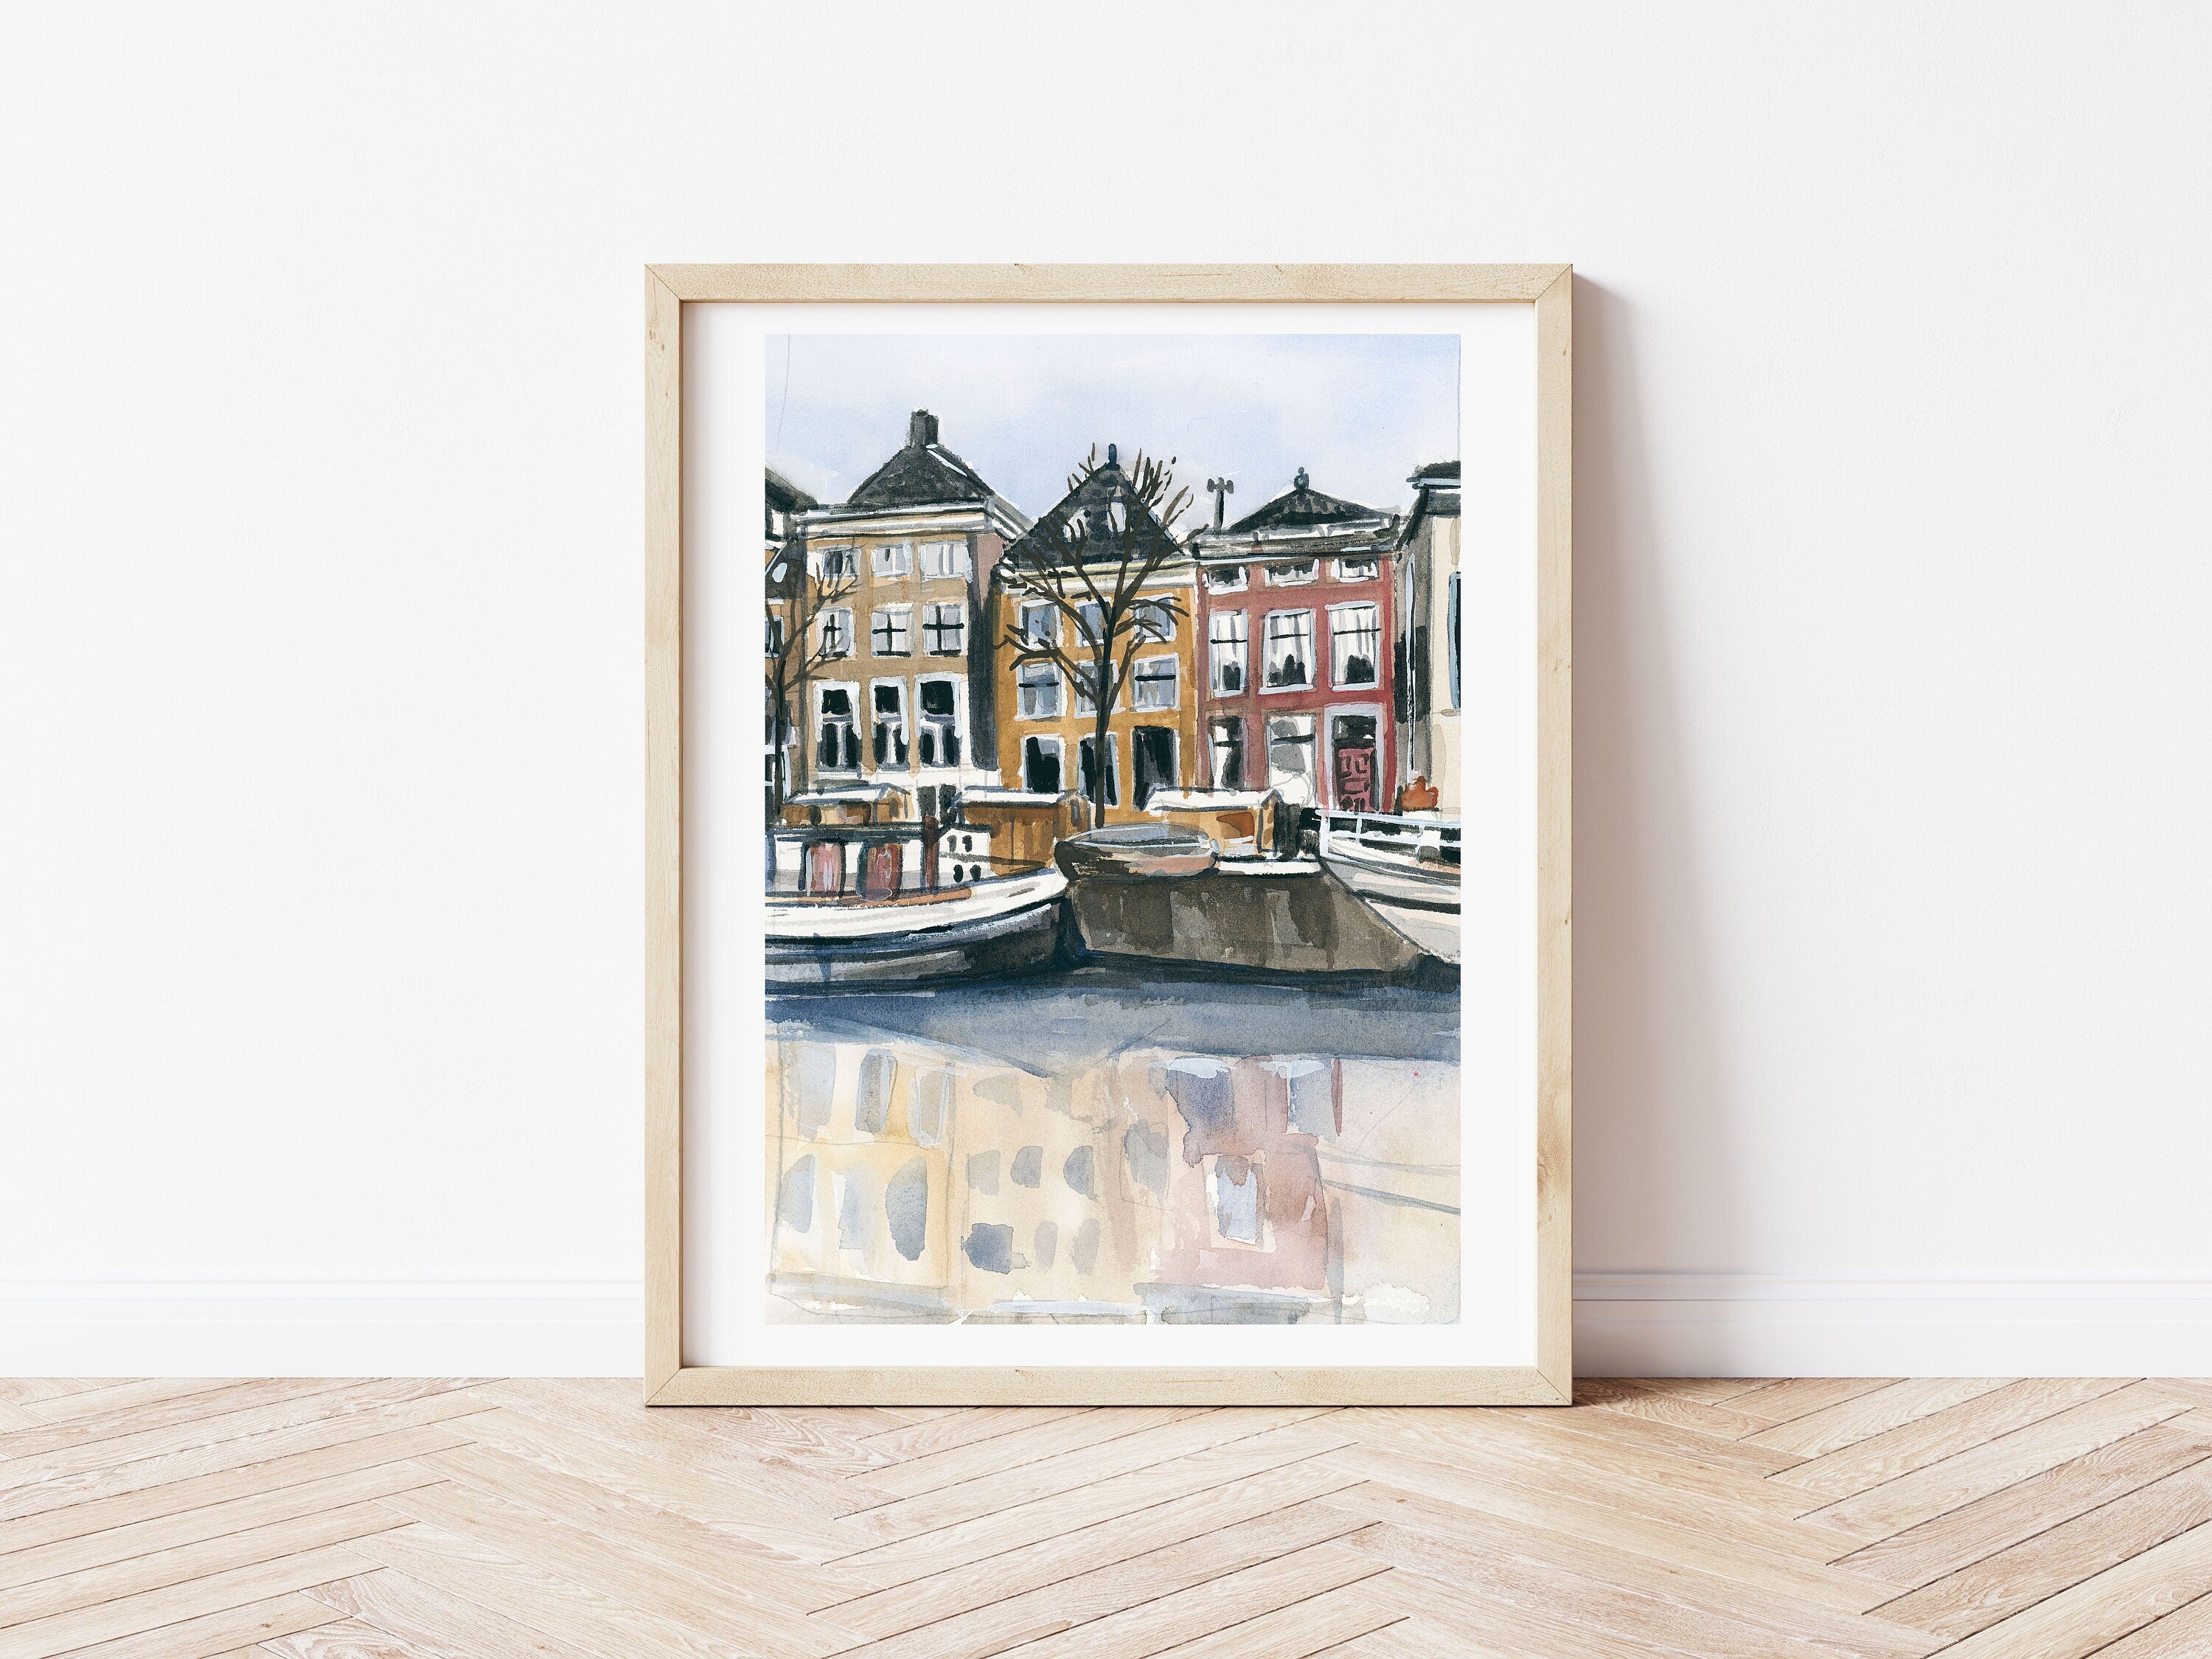 Amsterdam canal print of painting by Medjool Studio. Print of original gouache painting with brown, yellow and red building features behind small boats in the water from the Amsterdam canal.